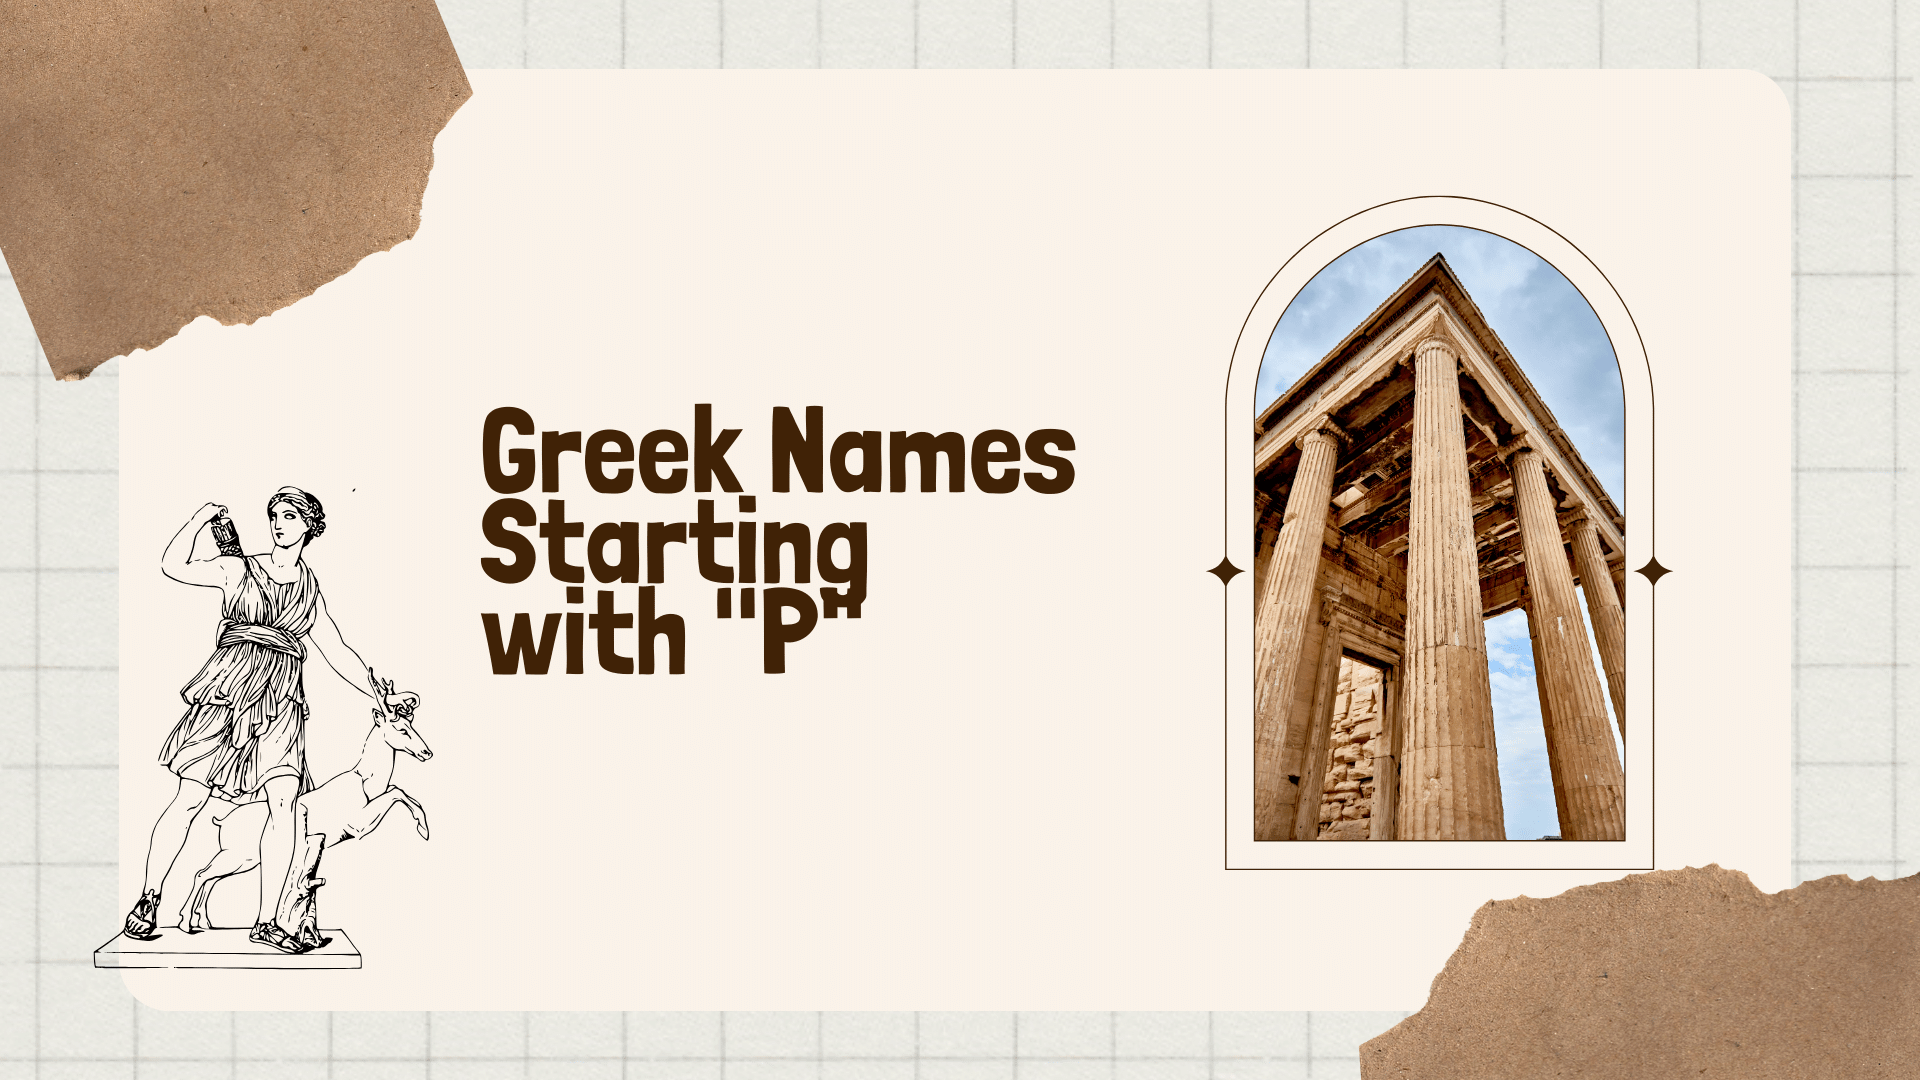 Greek Names Starting With "P"